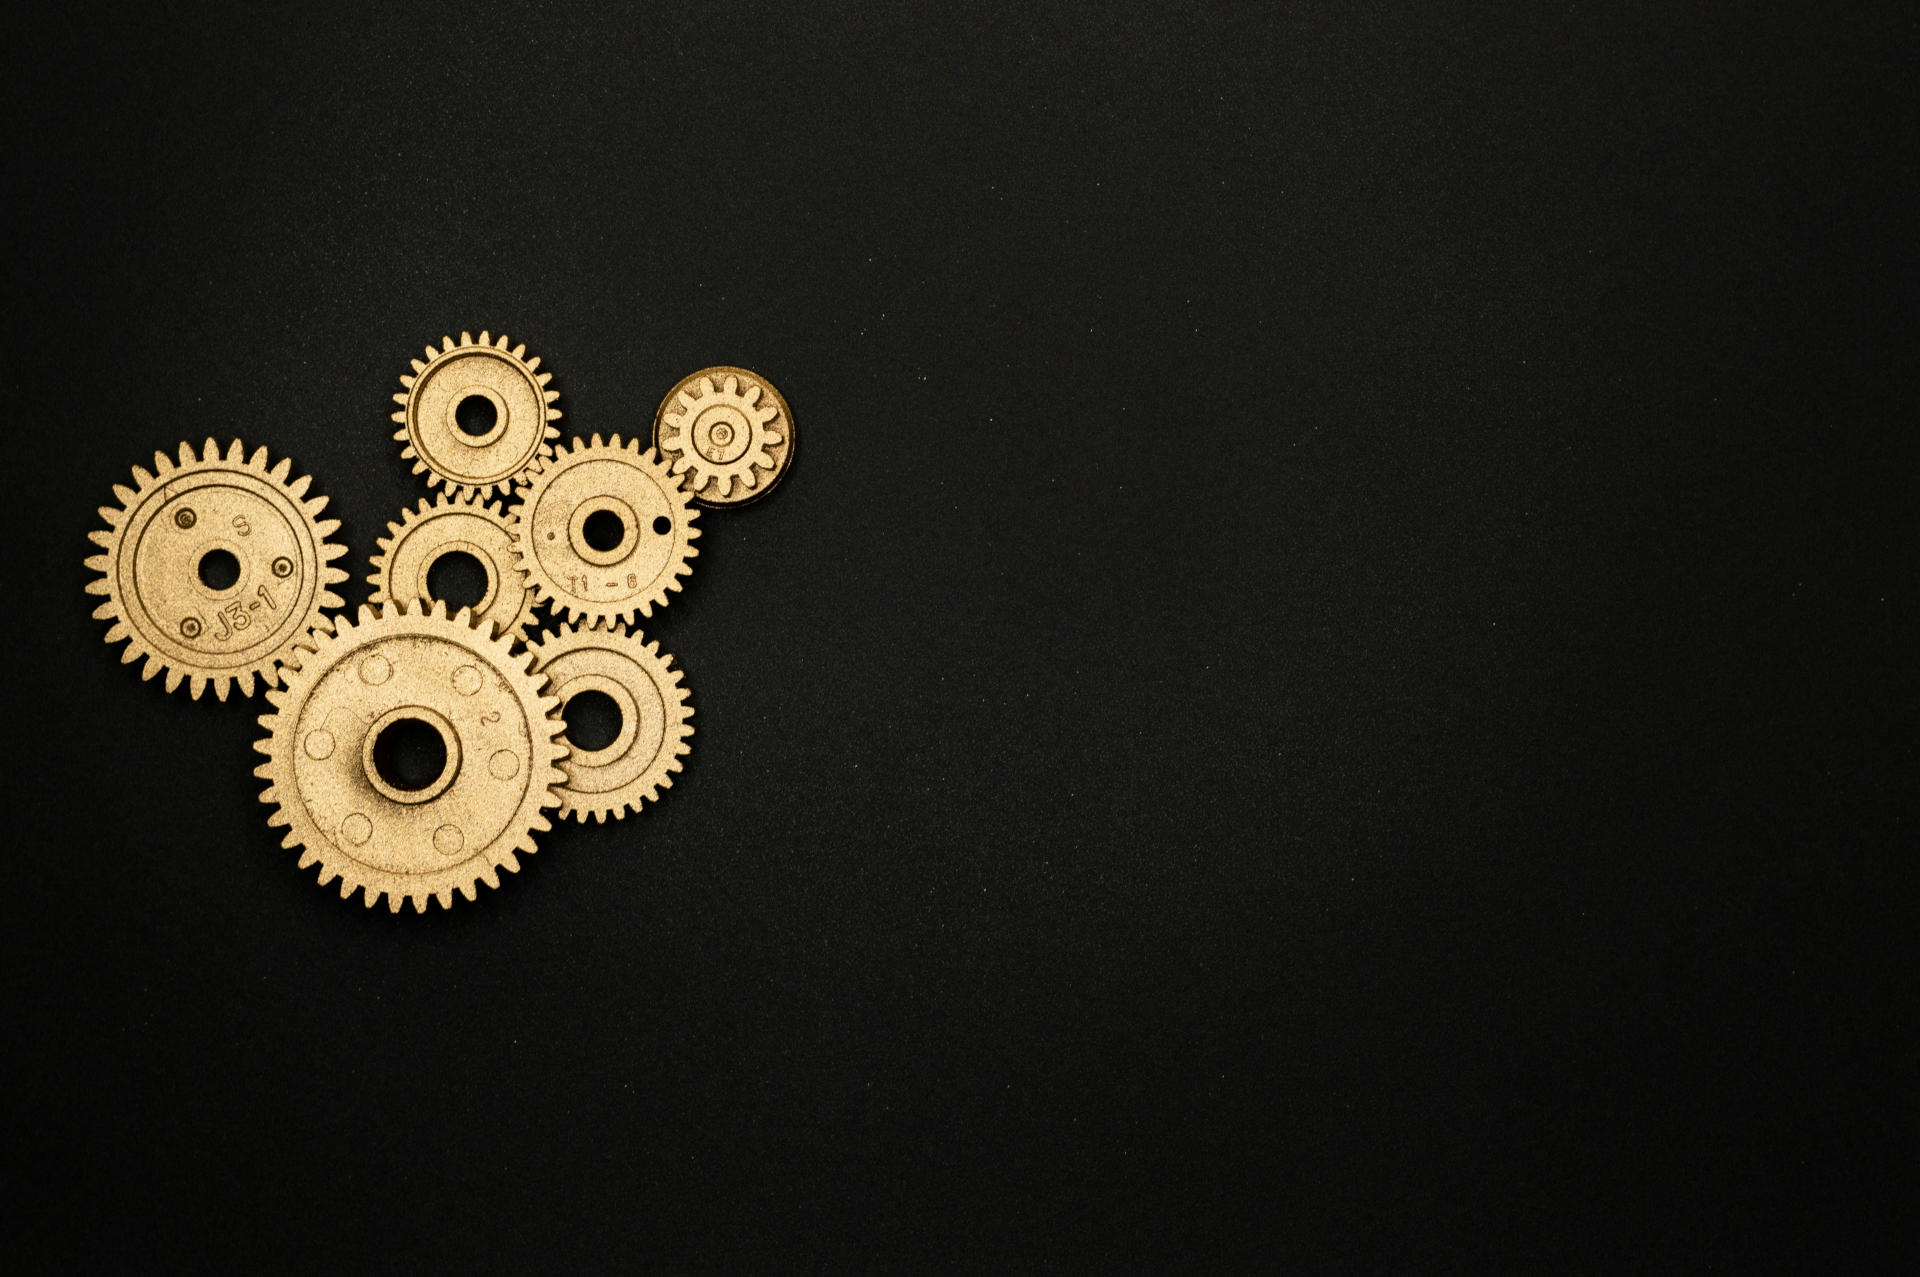 A set of meshed gears on a black background.